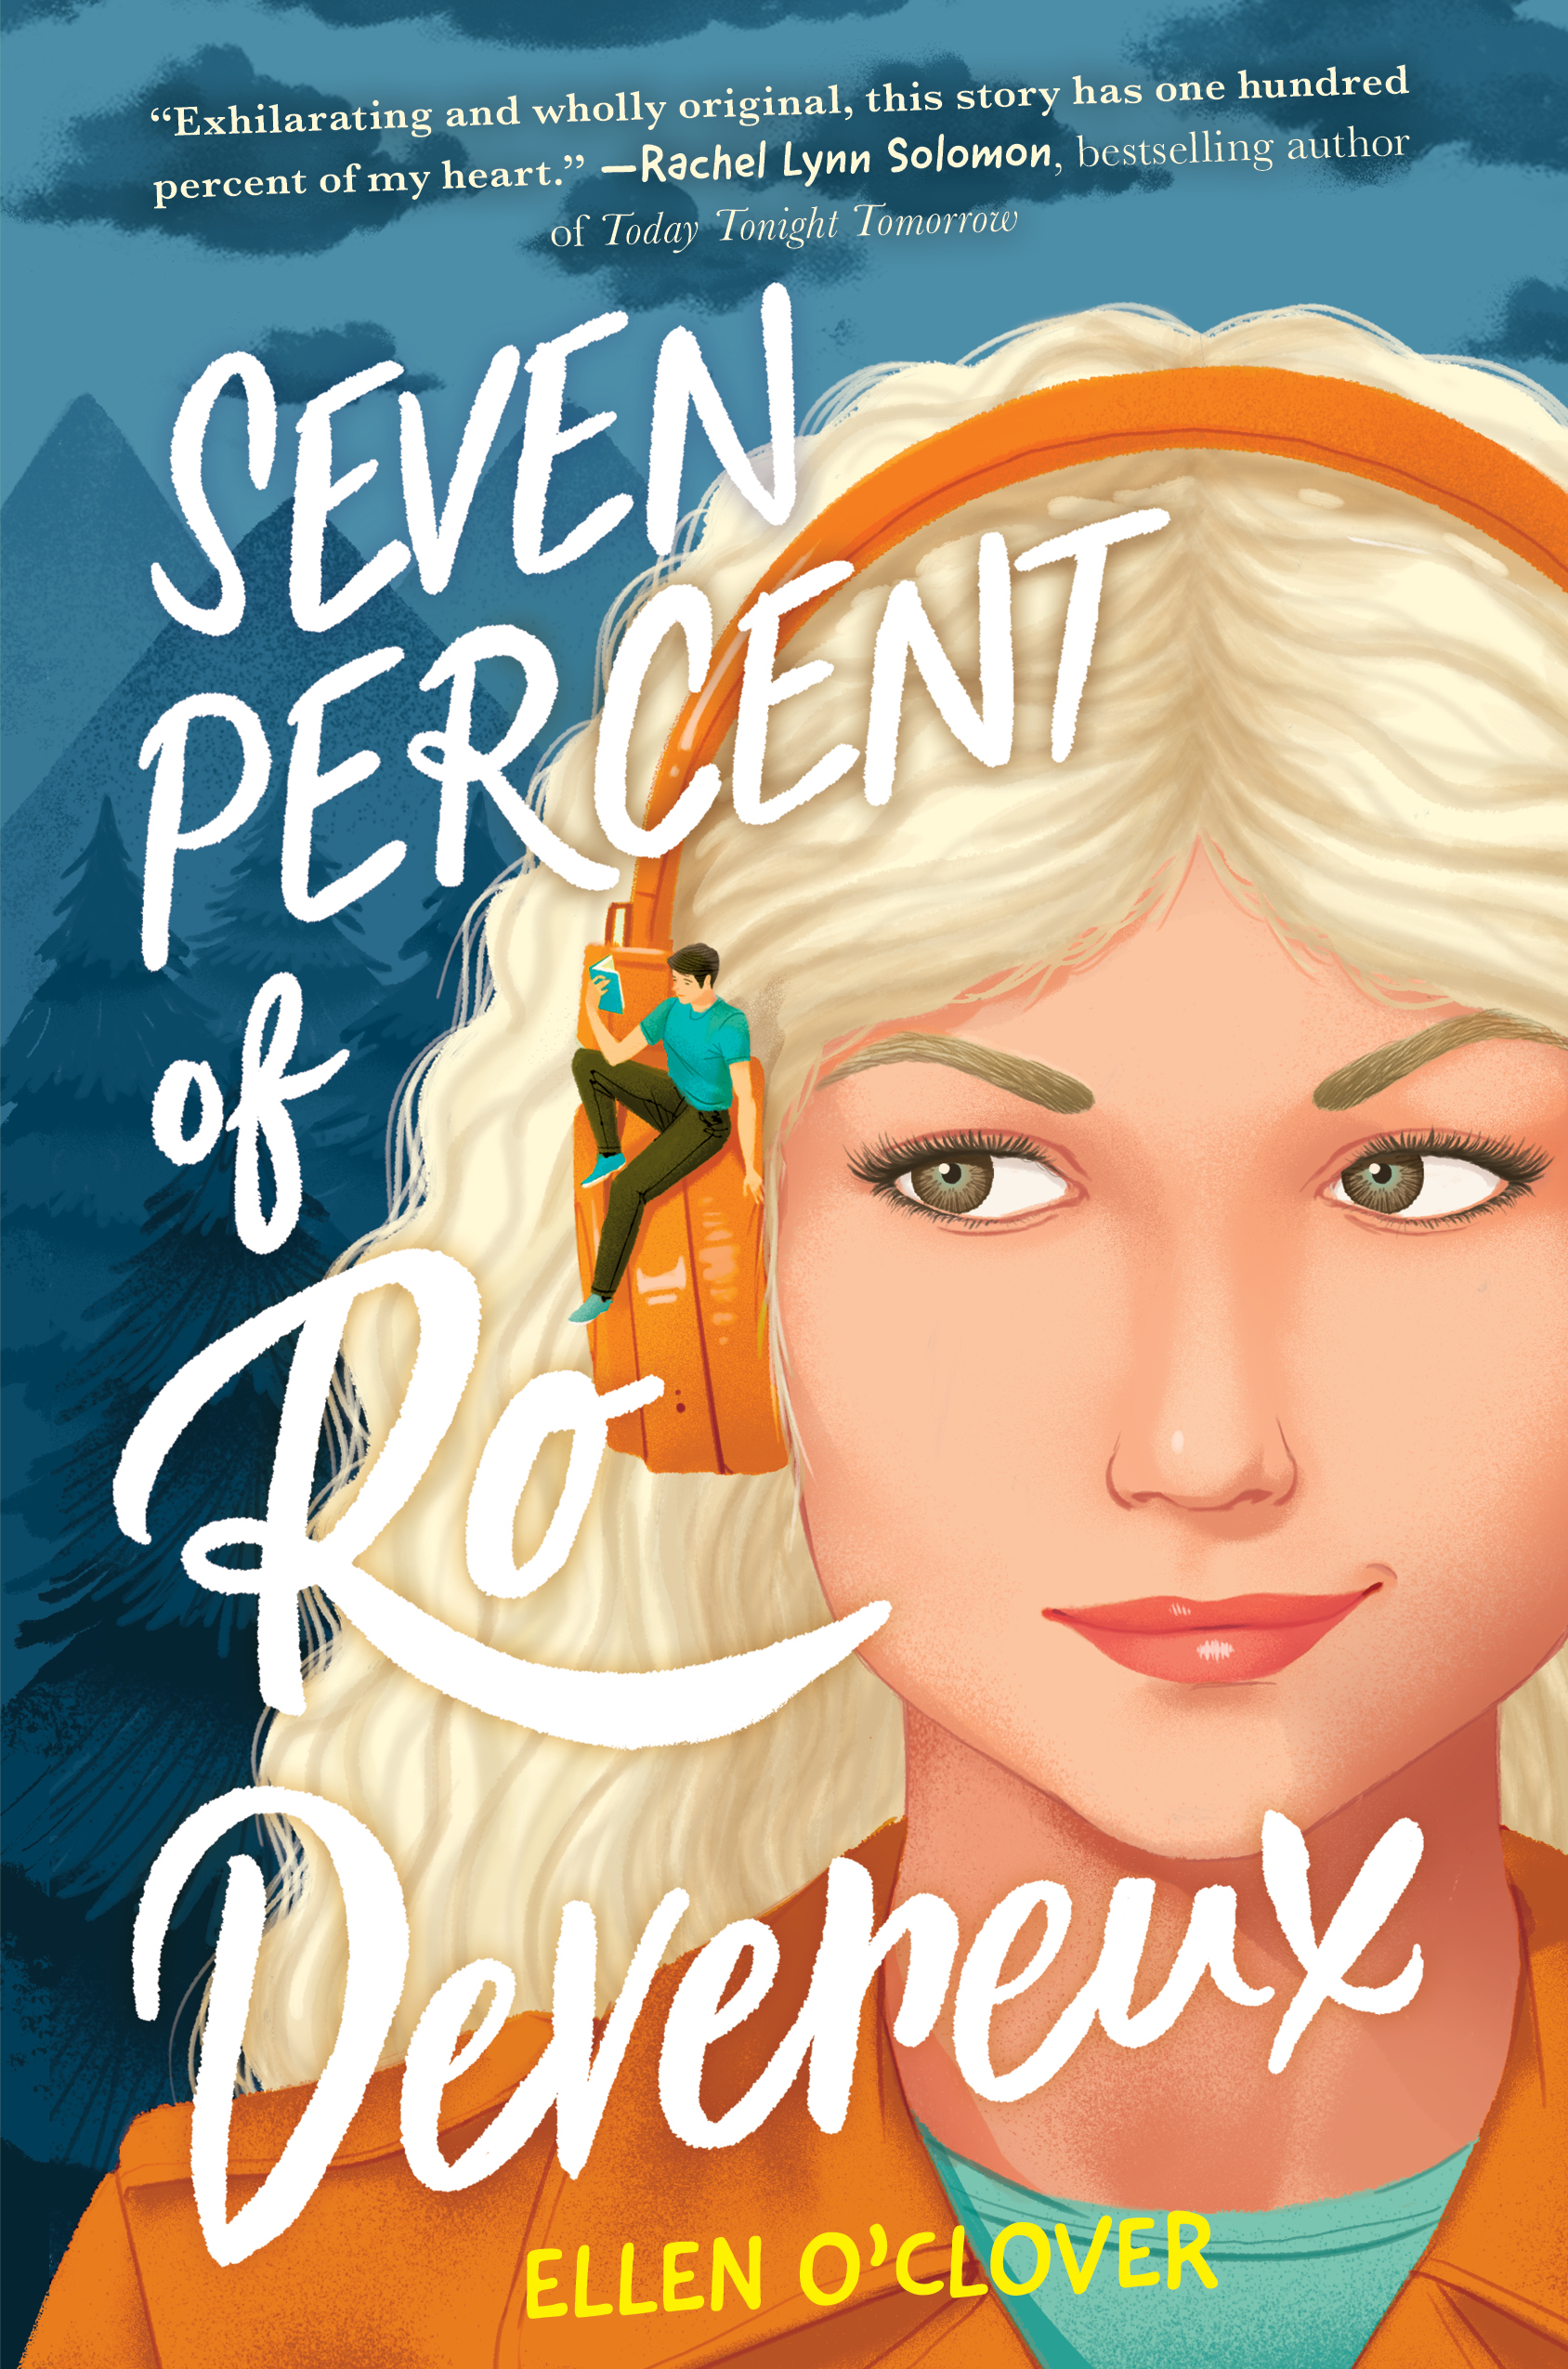 Author Chat With Ellen O’Clover (Seven Percent of Ro Devereux), Plus Giveaway! ~ US Only!